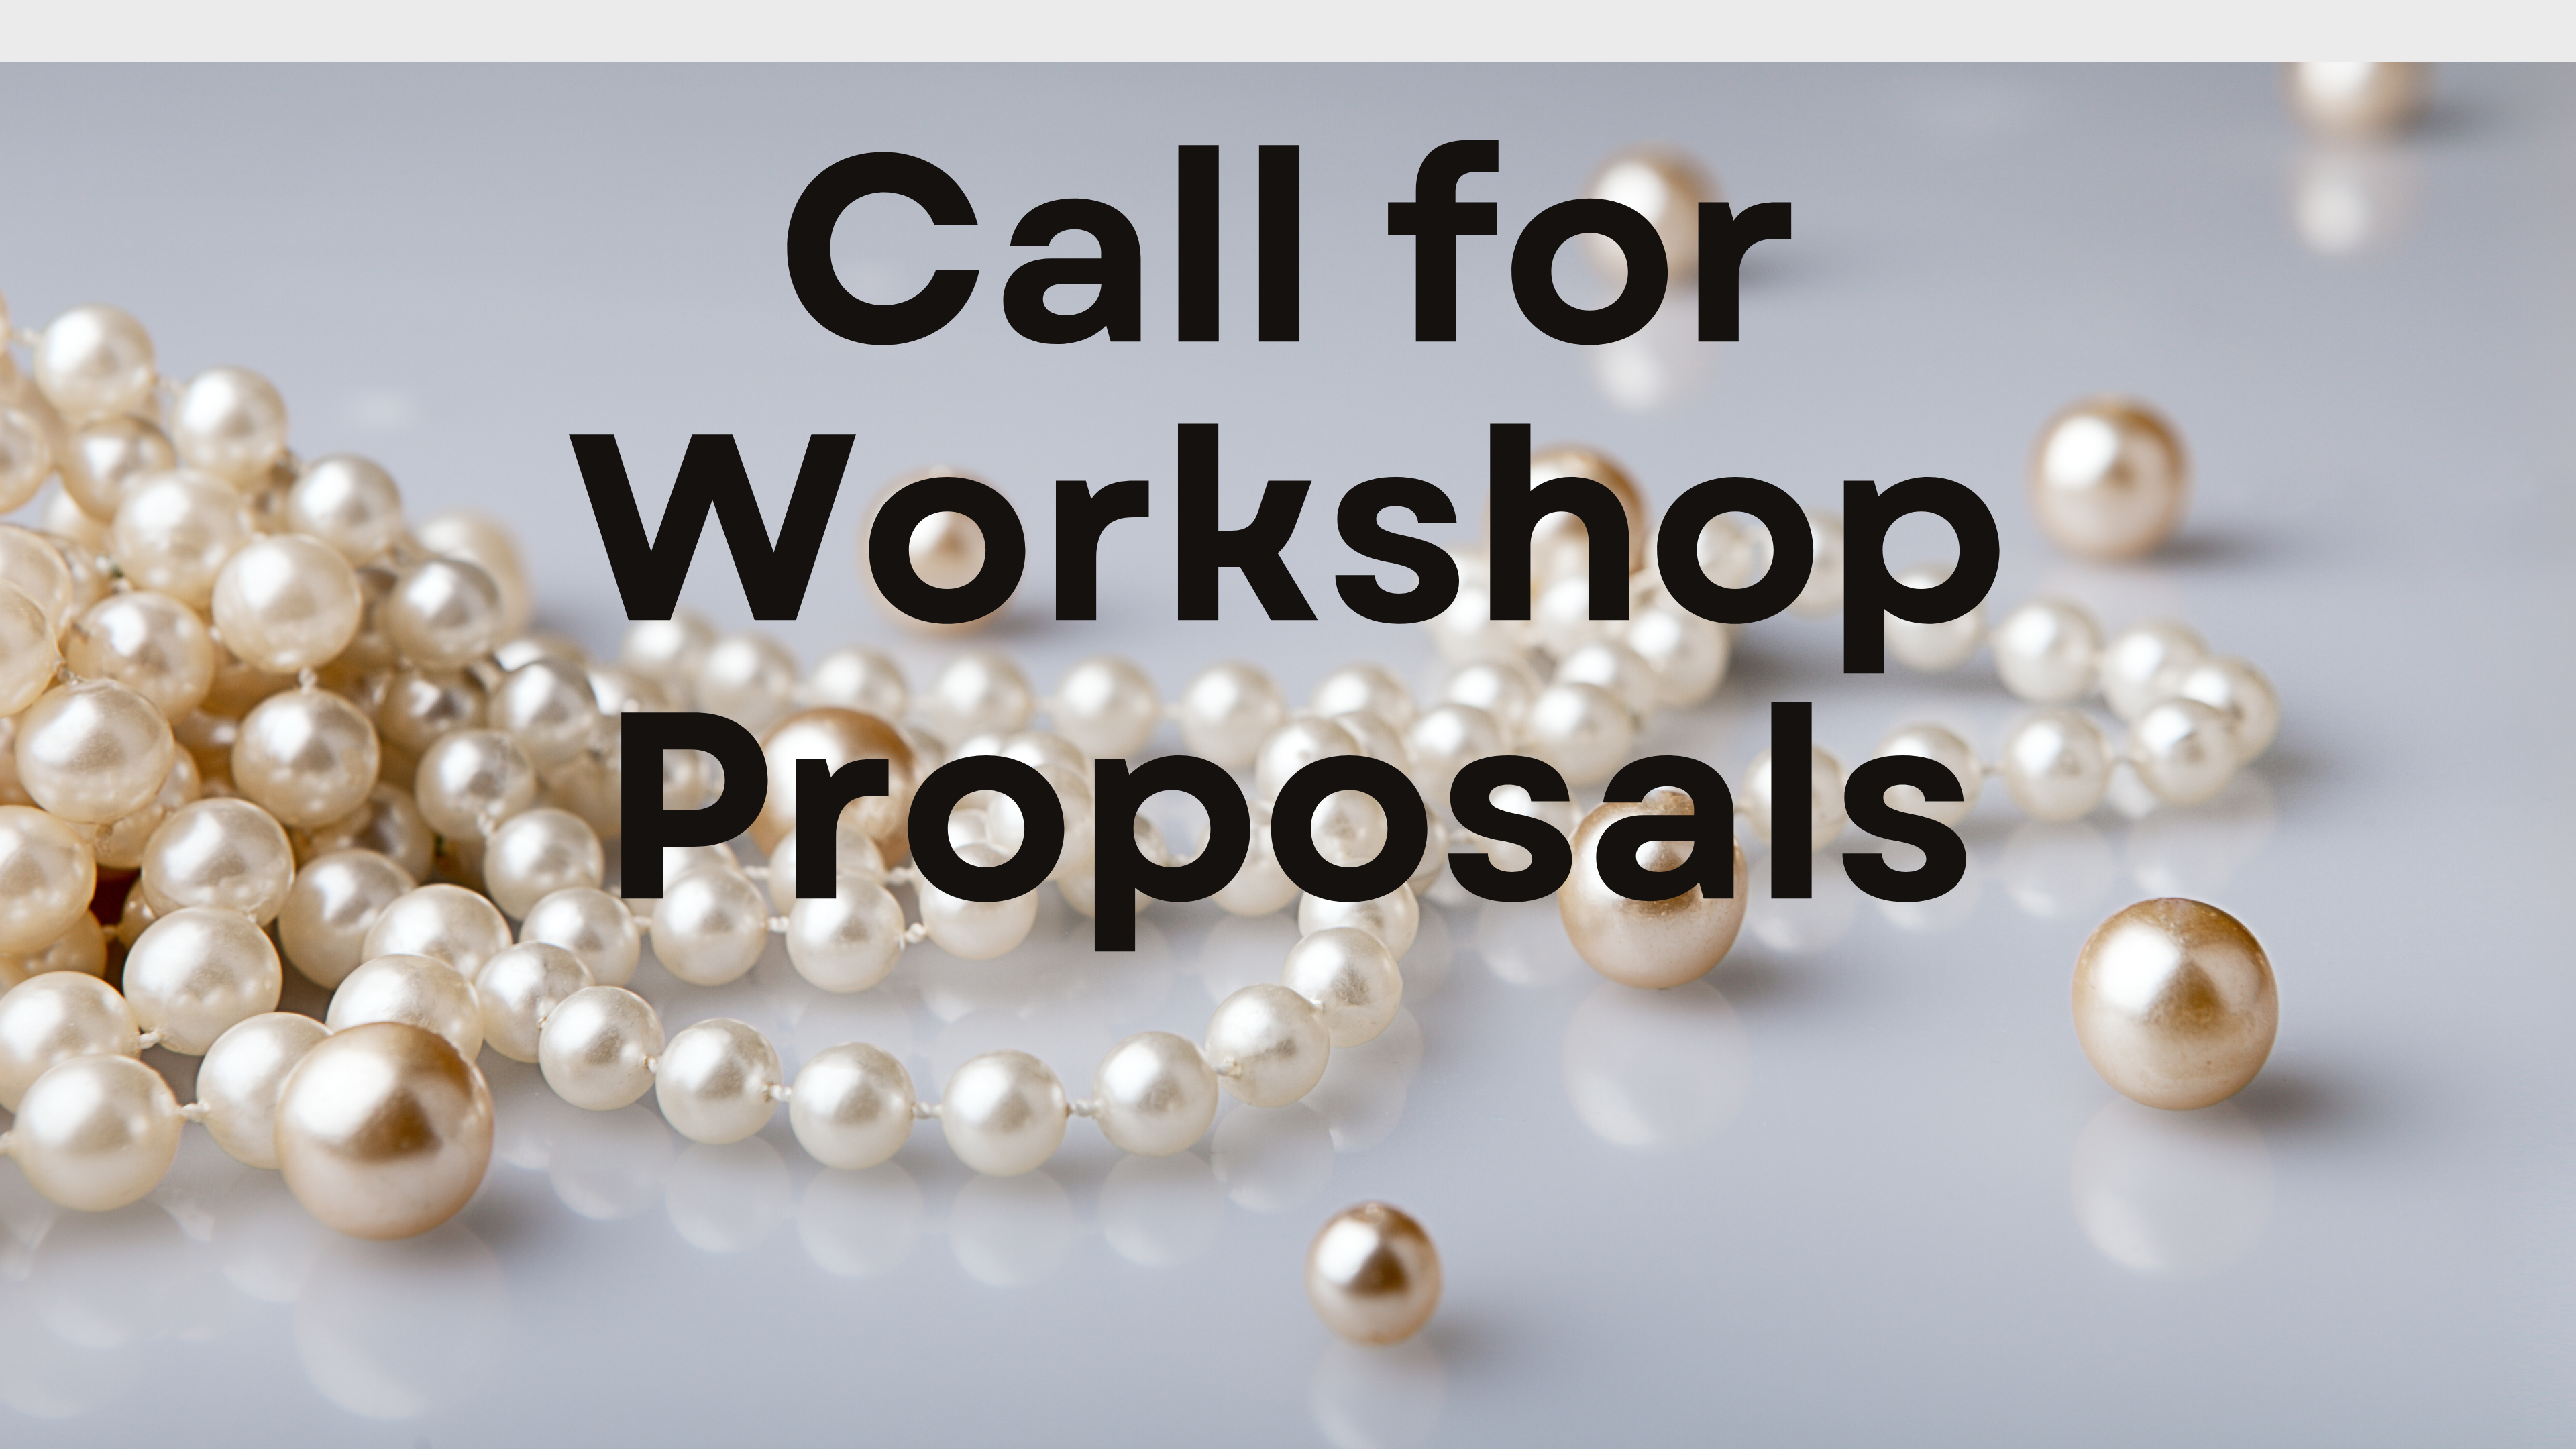 Call for workshop Proposals. Strands of Pearls across the image.